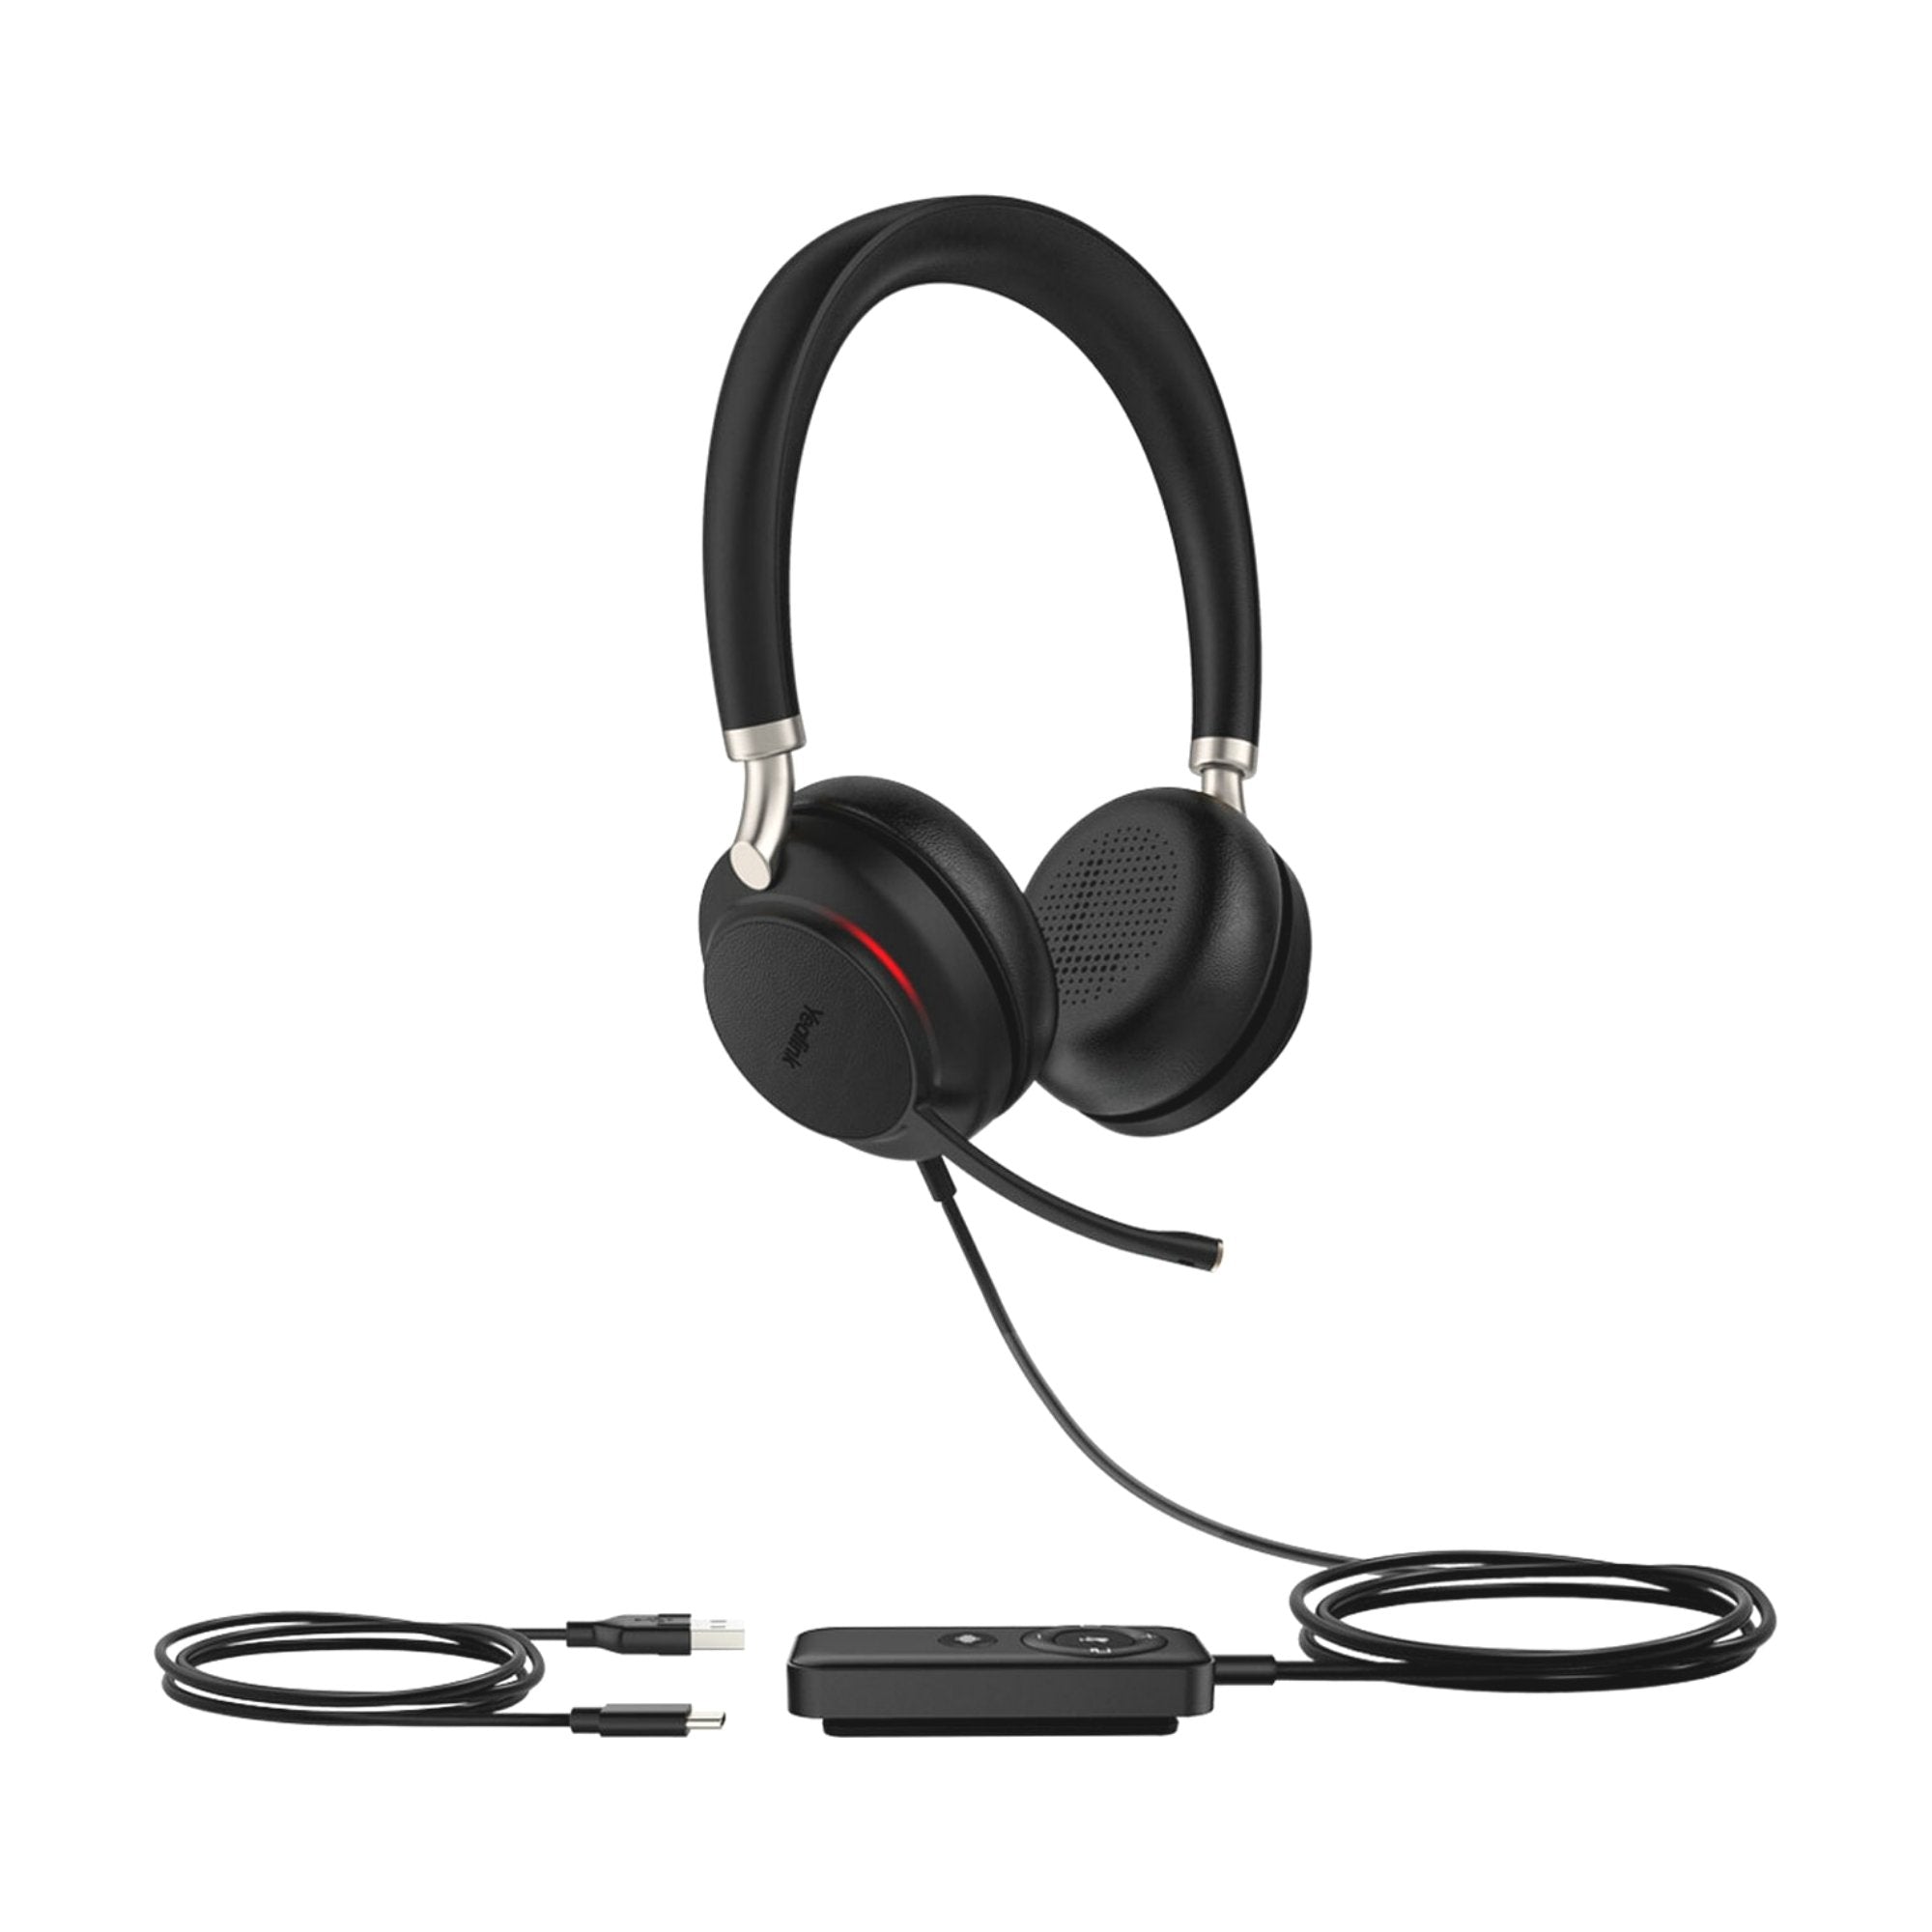 Yealink UH38 Wired USB Duo Headset (Pre-Order) - Headset Advisor